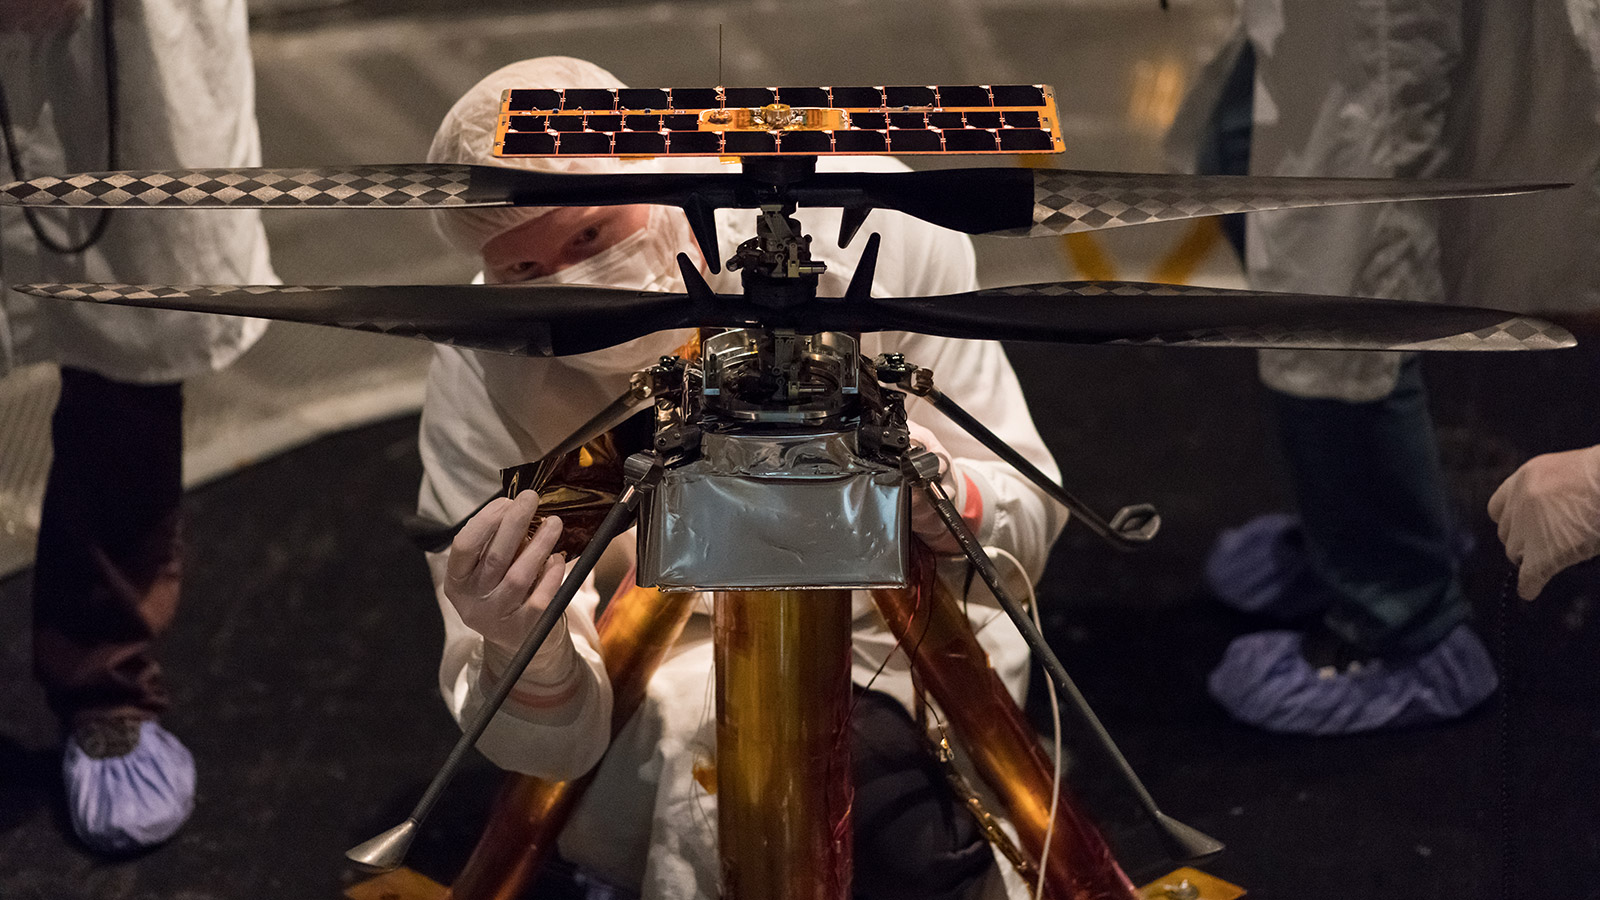 Members of the NASA Mars Helicopter team attach a thermal film to the exterior of the flight model of the Mars Helicopter.